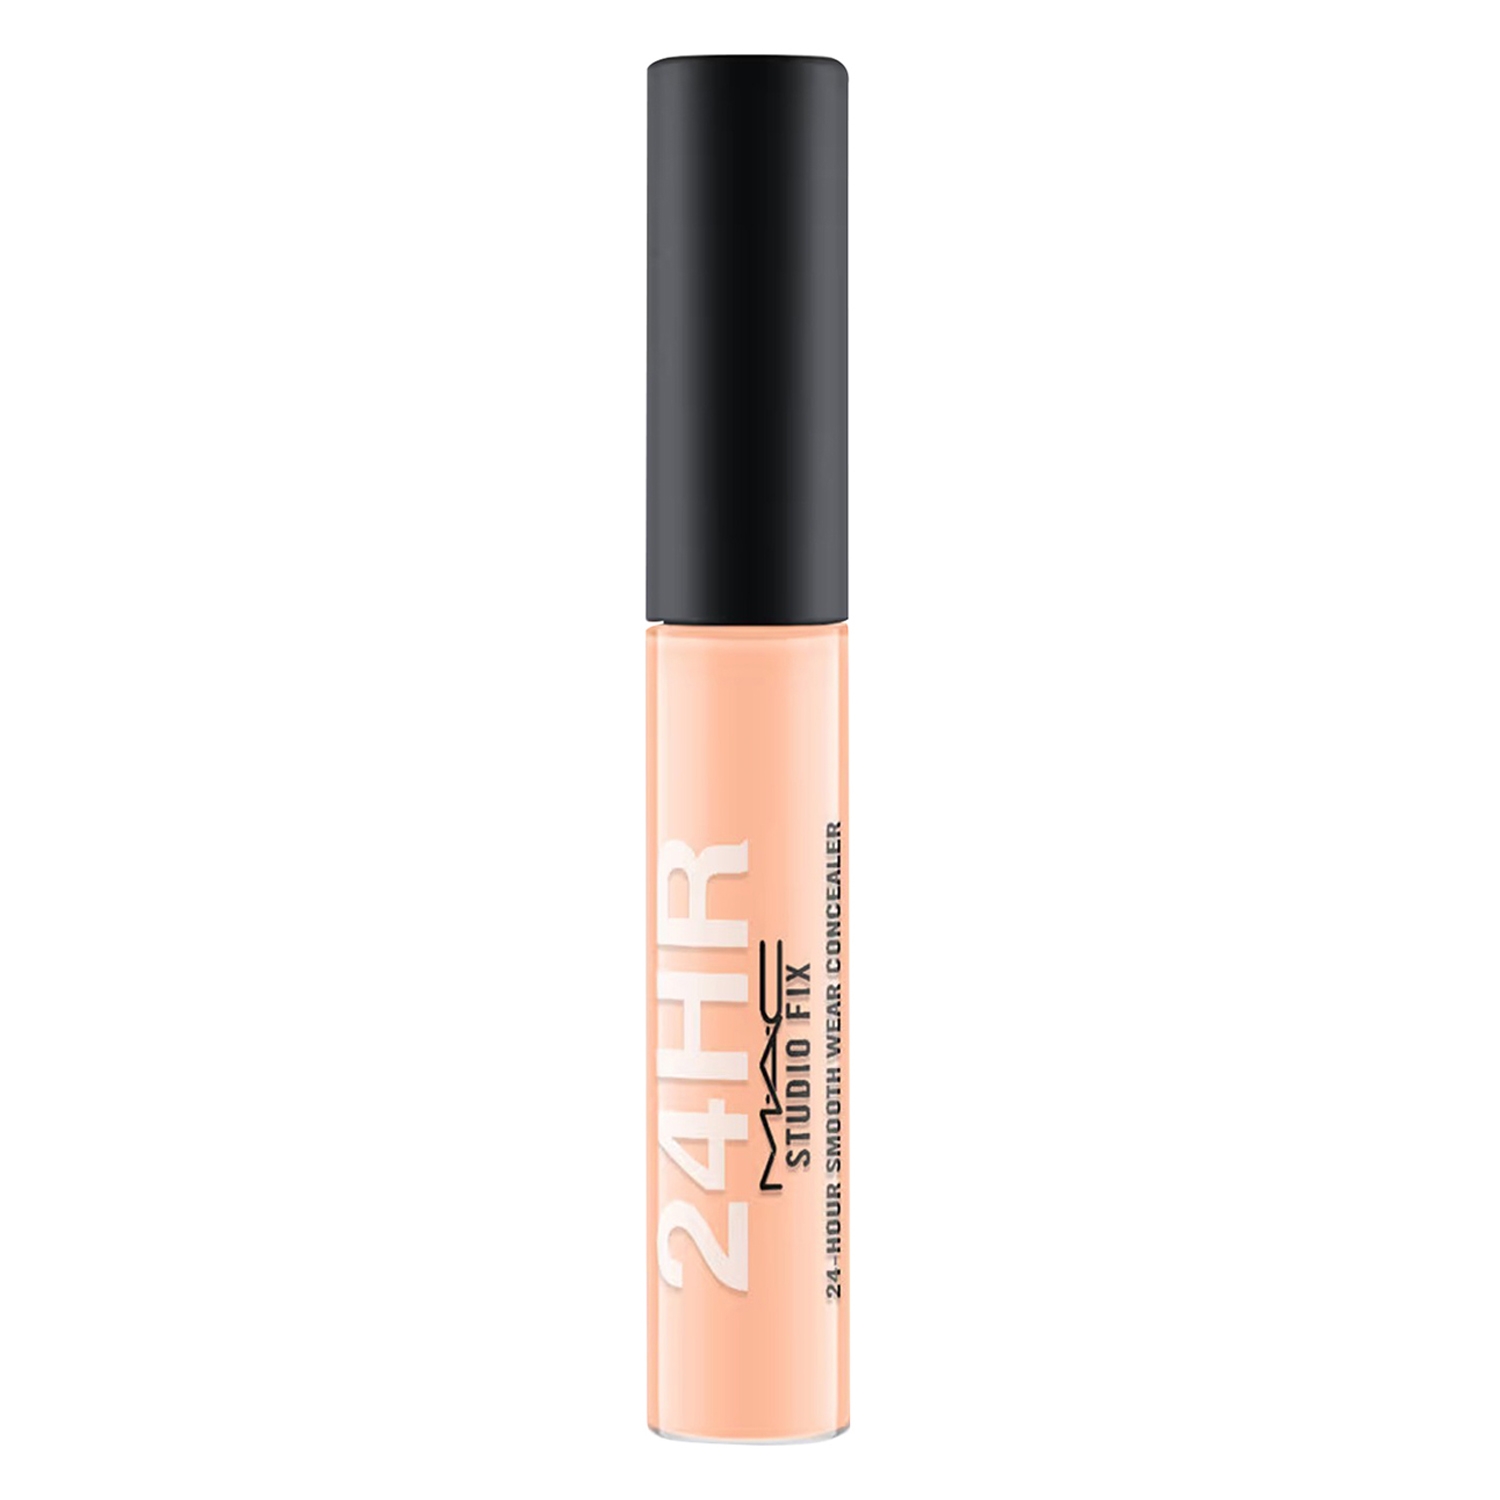 M.A.C | M.A.C Studio Fix 24-Hour Smooth Wear Concealer - NW28 (7ml)